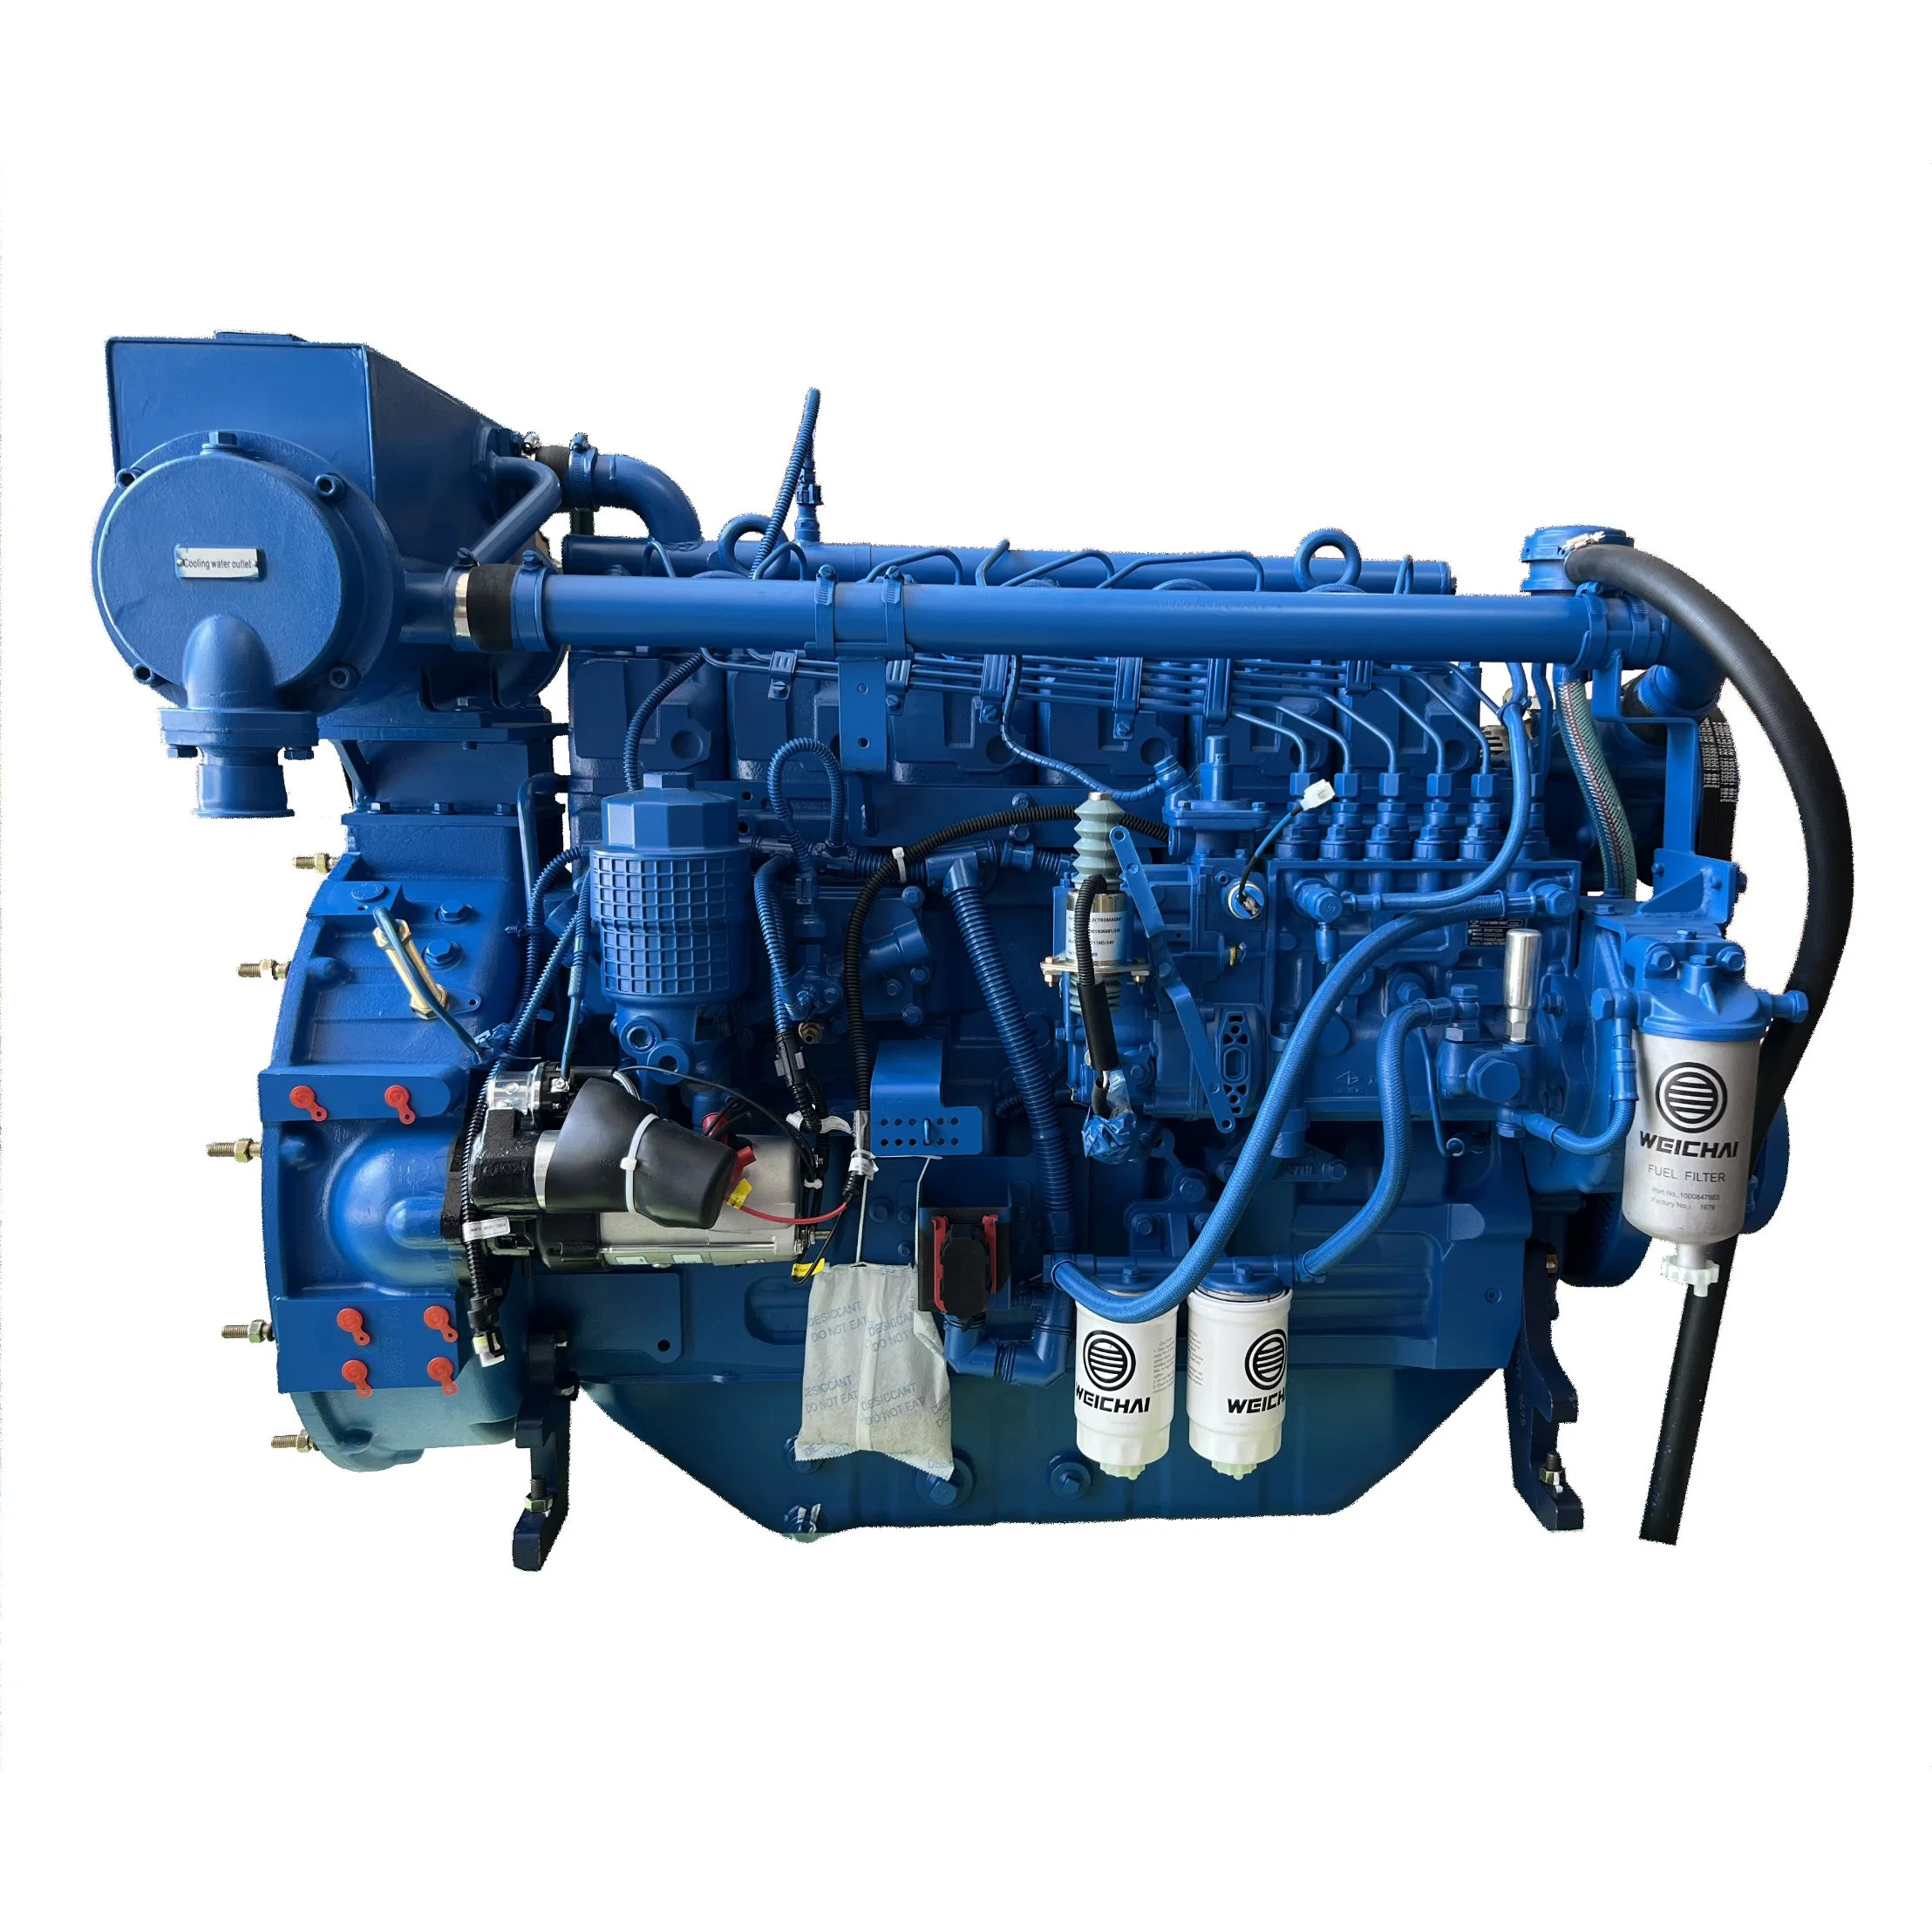 Brand New Water Cooling Chaochai Vehicle Diesel Engine Ngd3.0-CS5d